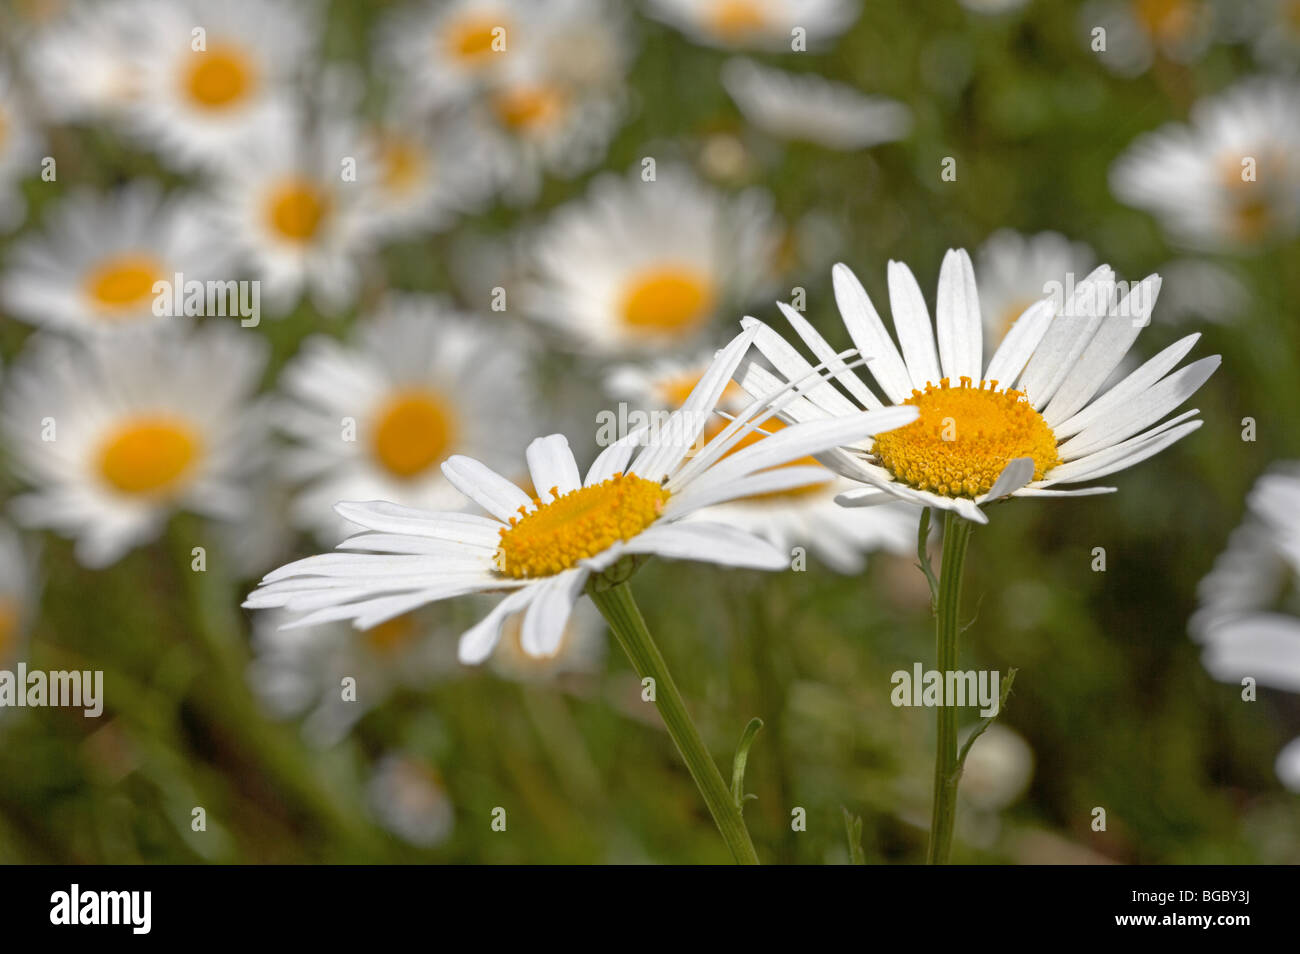 Two Shasta daisy heads against a background of daisies. Stock Photo